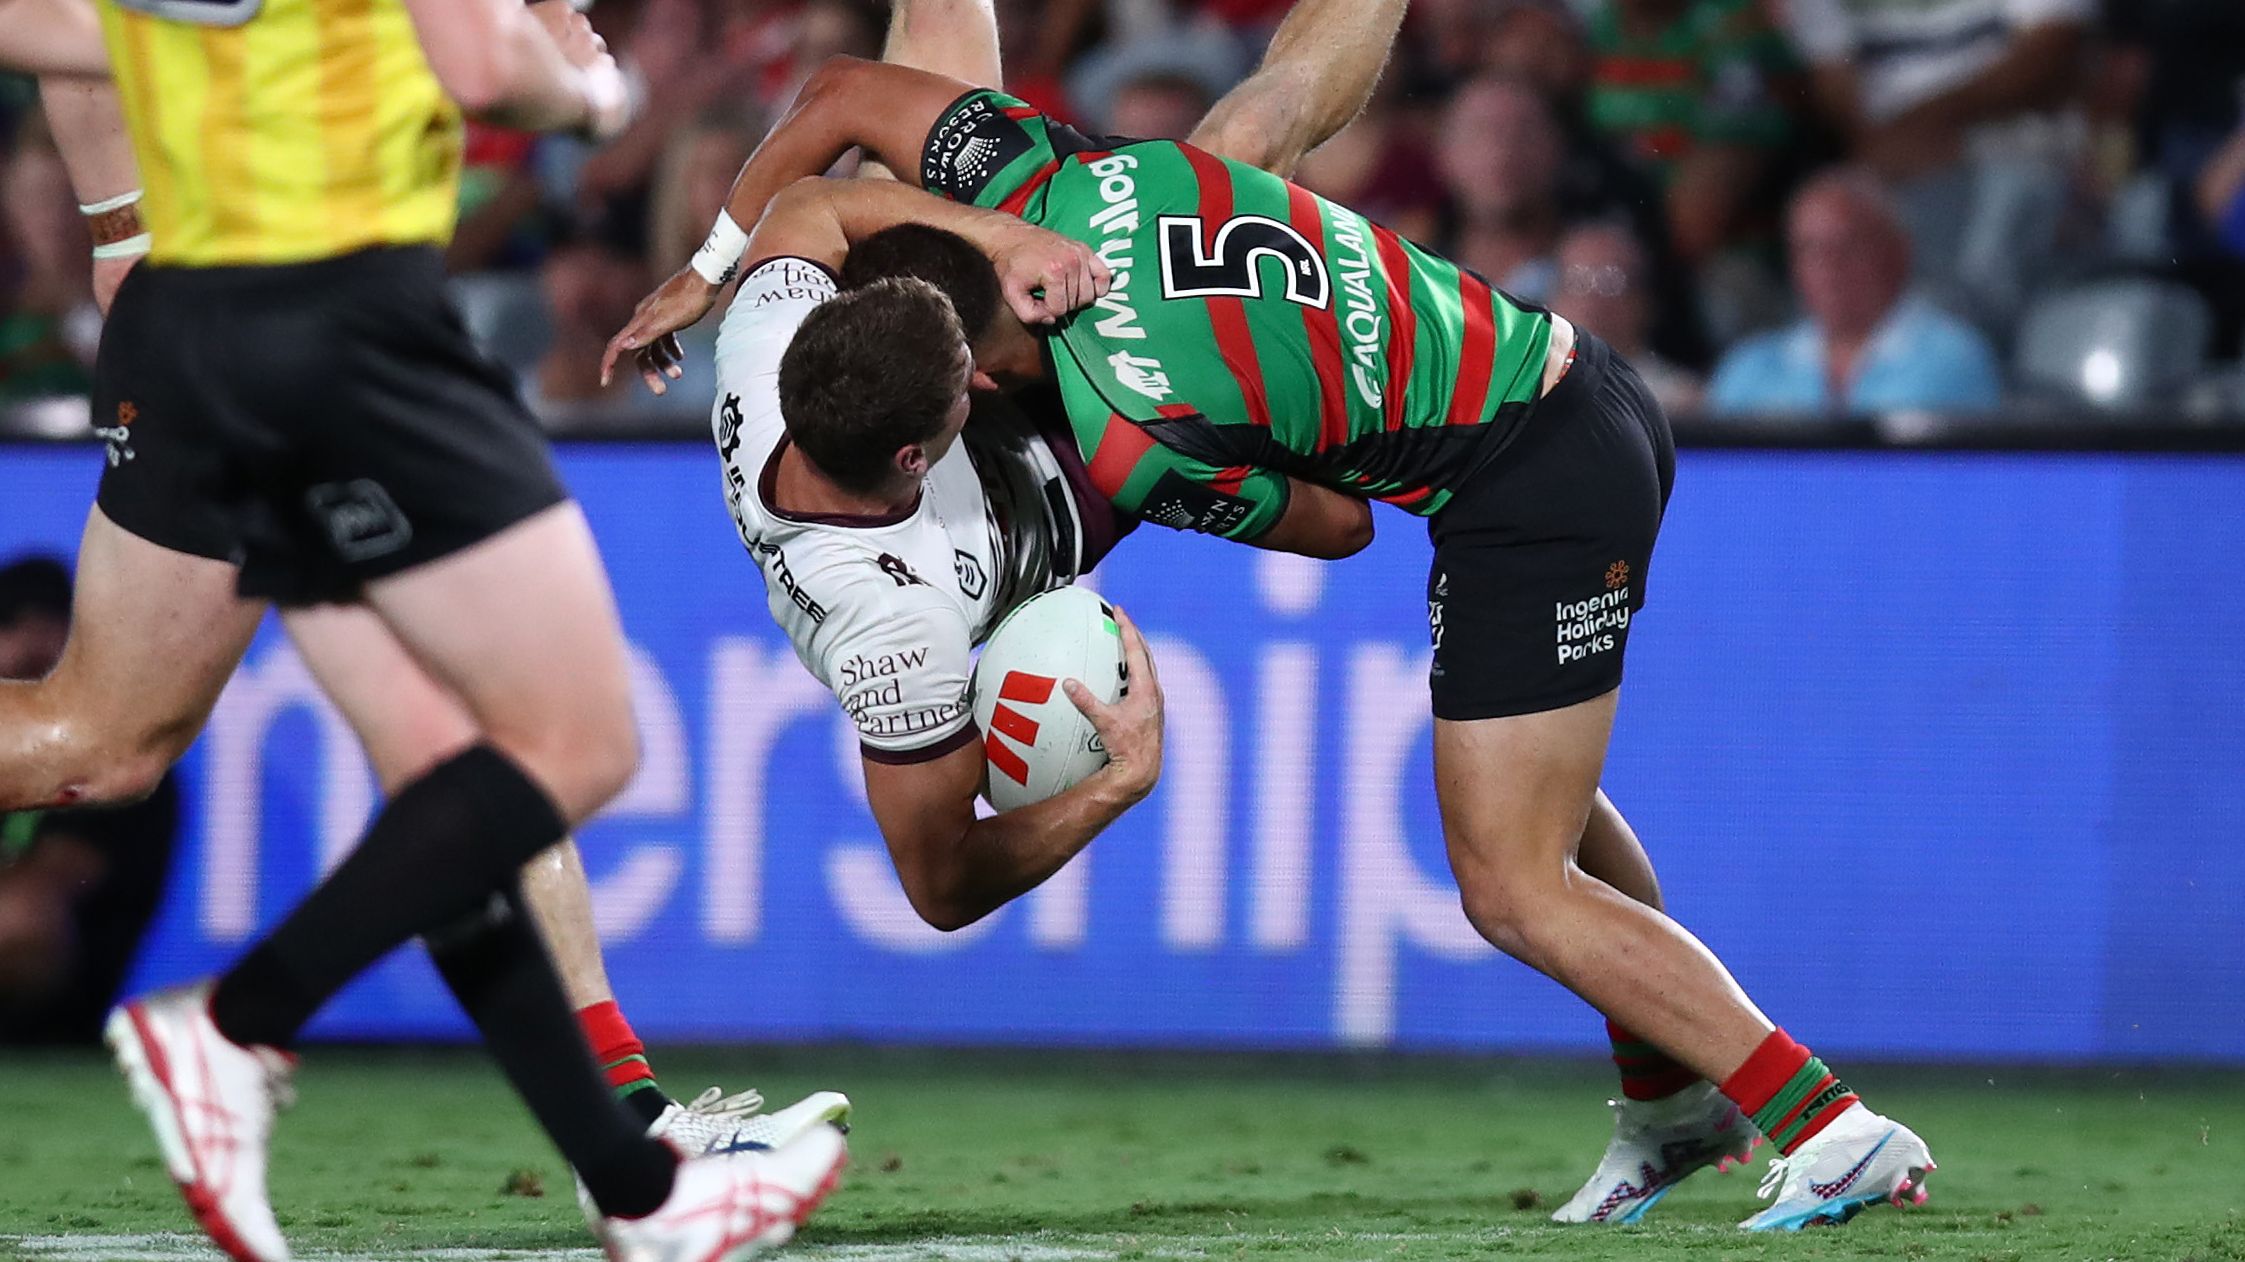 Fletcher Myers of the Sea Eagles is tackled by Leon Te Hau of the Rabbitohs during the South Sydney Rabbitohs and the Manly Sea Eagles at Industree Group Stadium on February 10, 2023 in Gosford, Australia. (Photo by Jason McCawley/Getty Images)